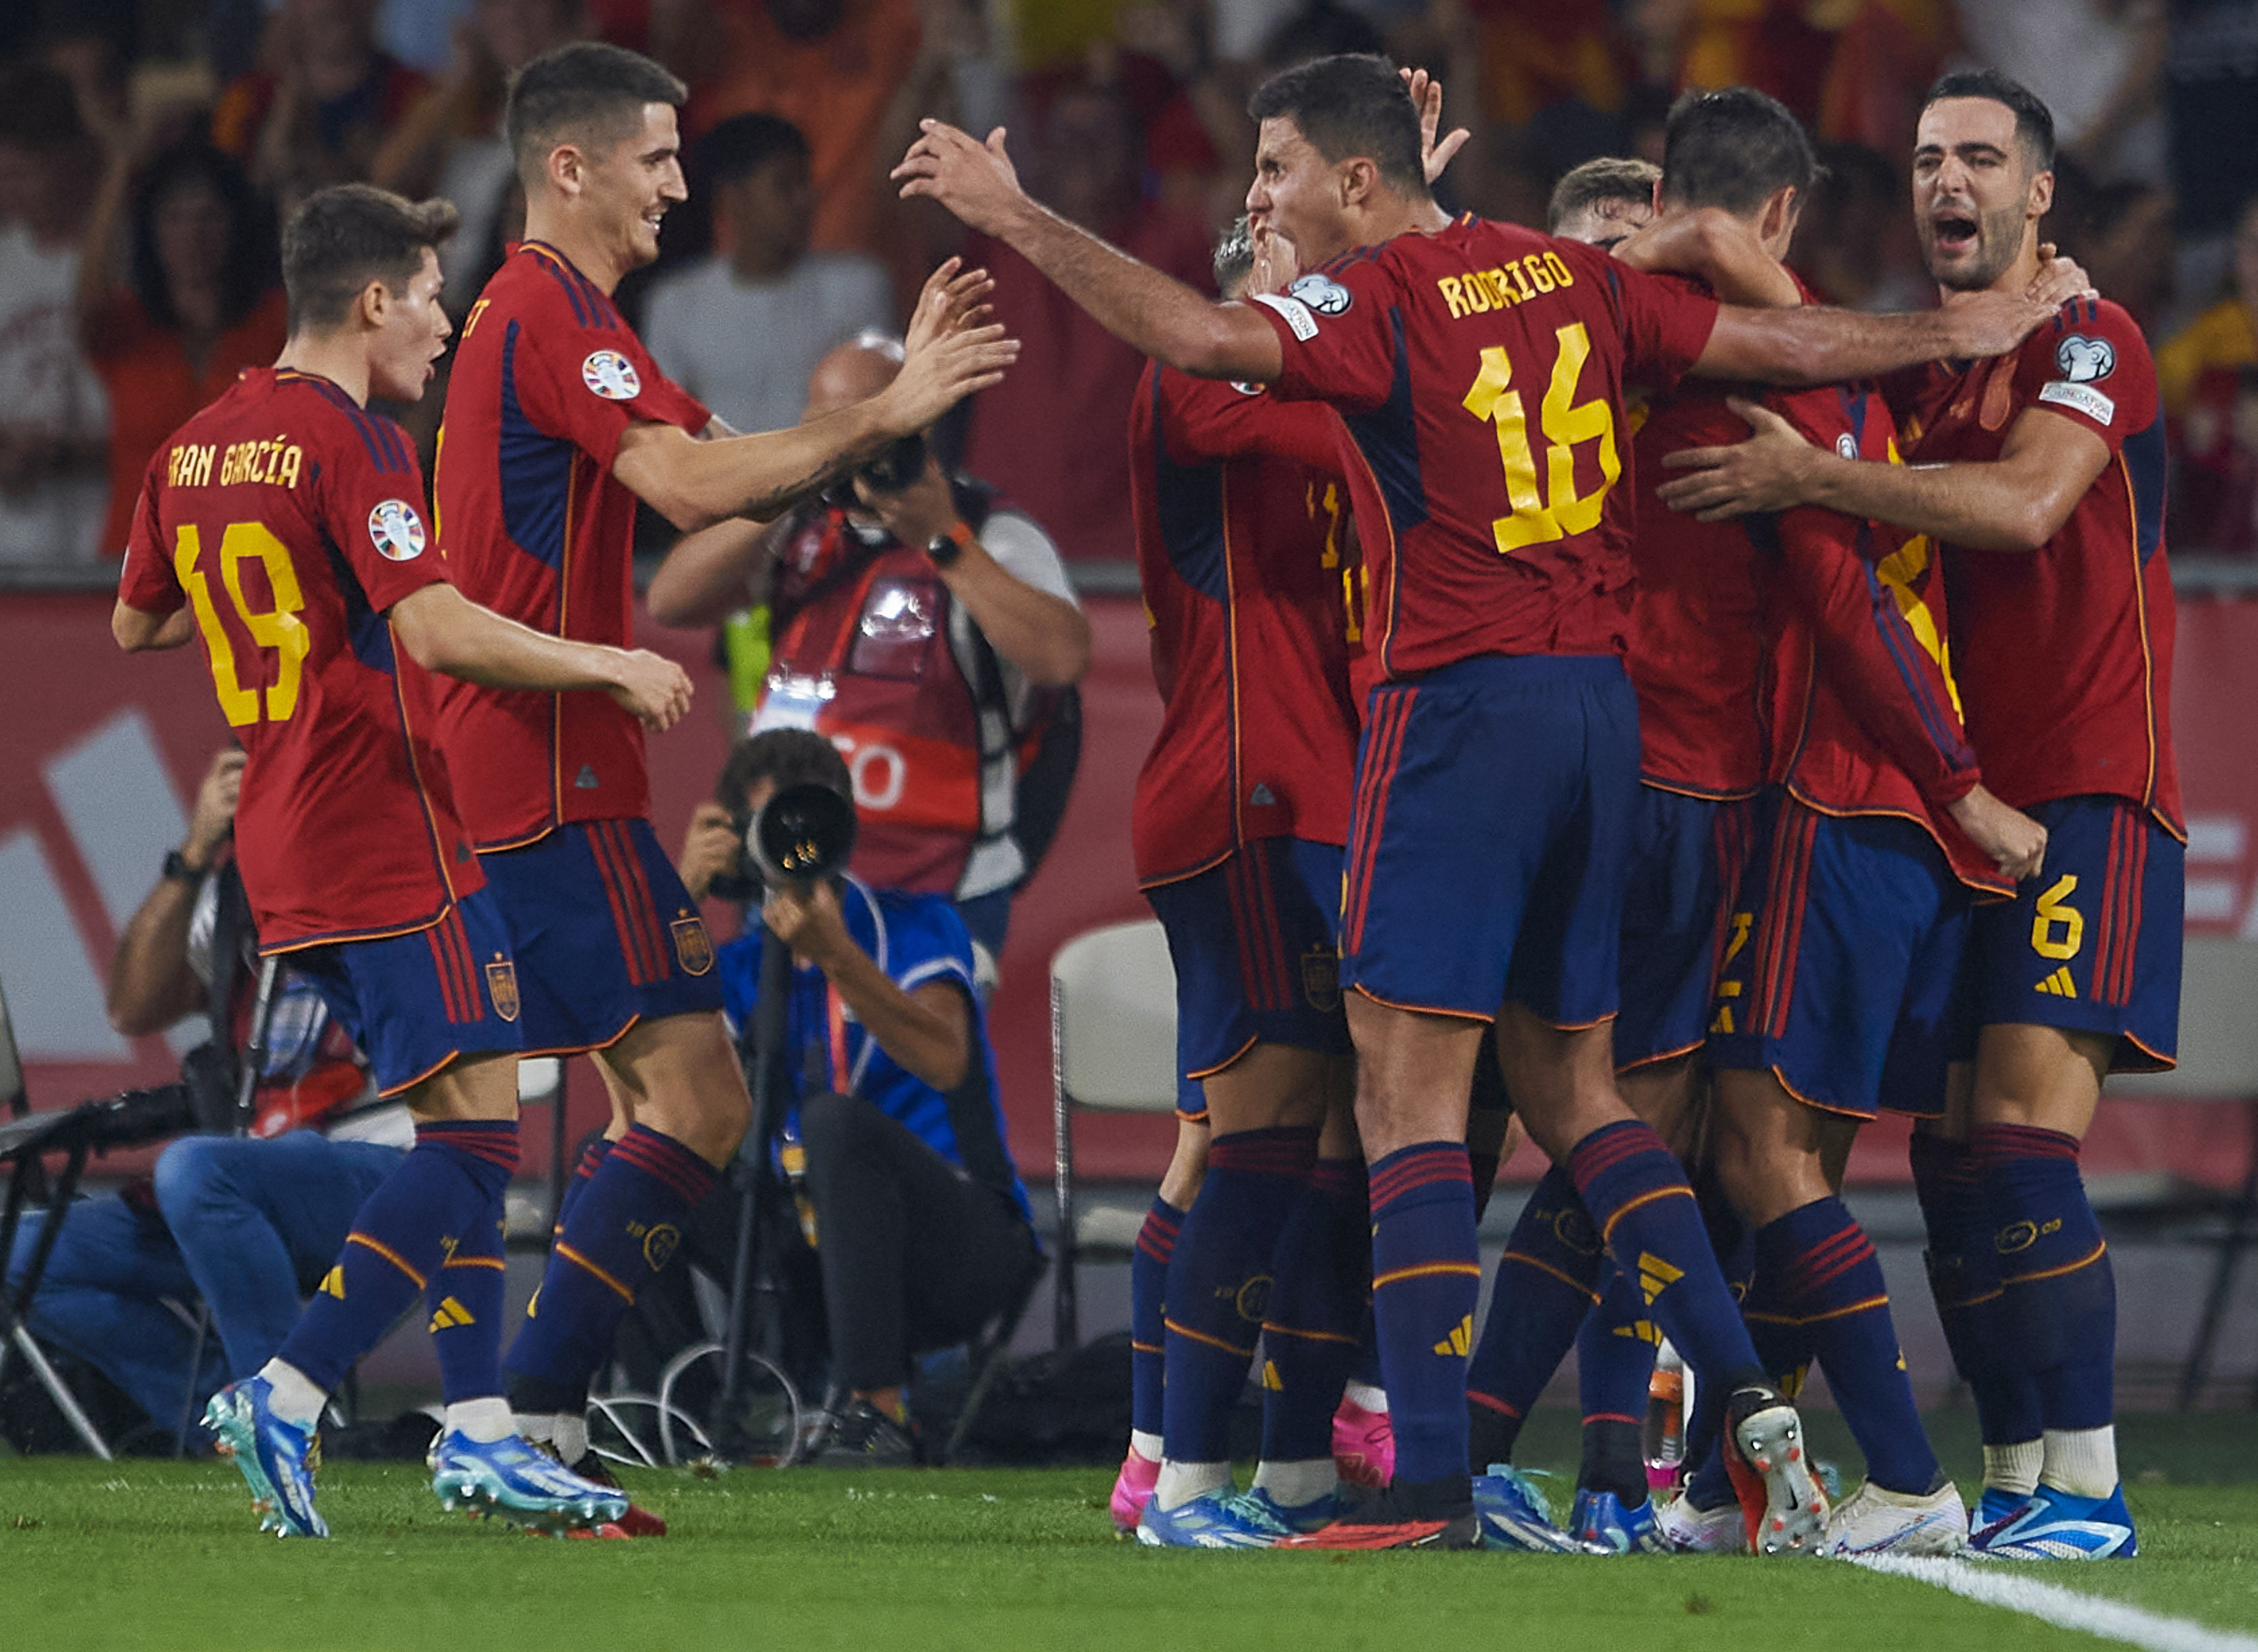 Could a reunion with Euro qualifying opponents Spain be on the cards? (Photo by Fran Macia / SNS Group)